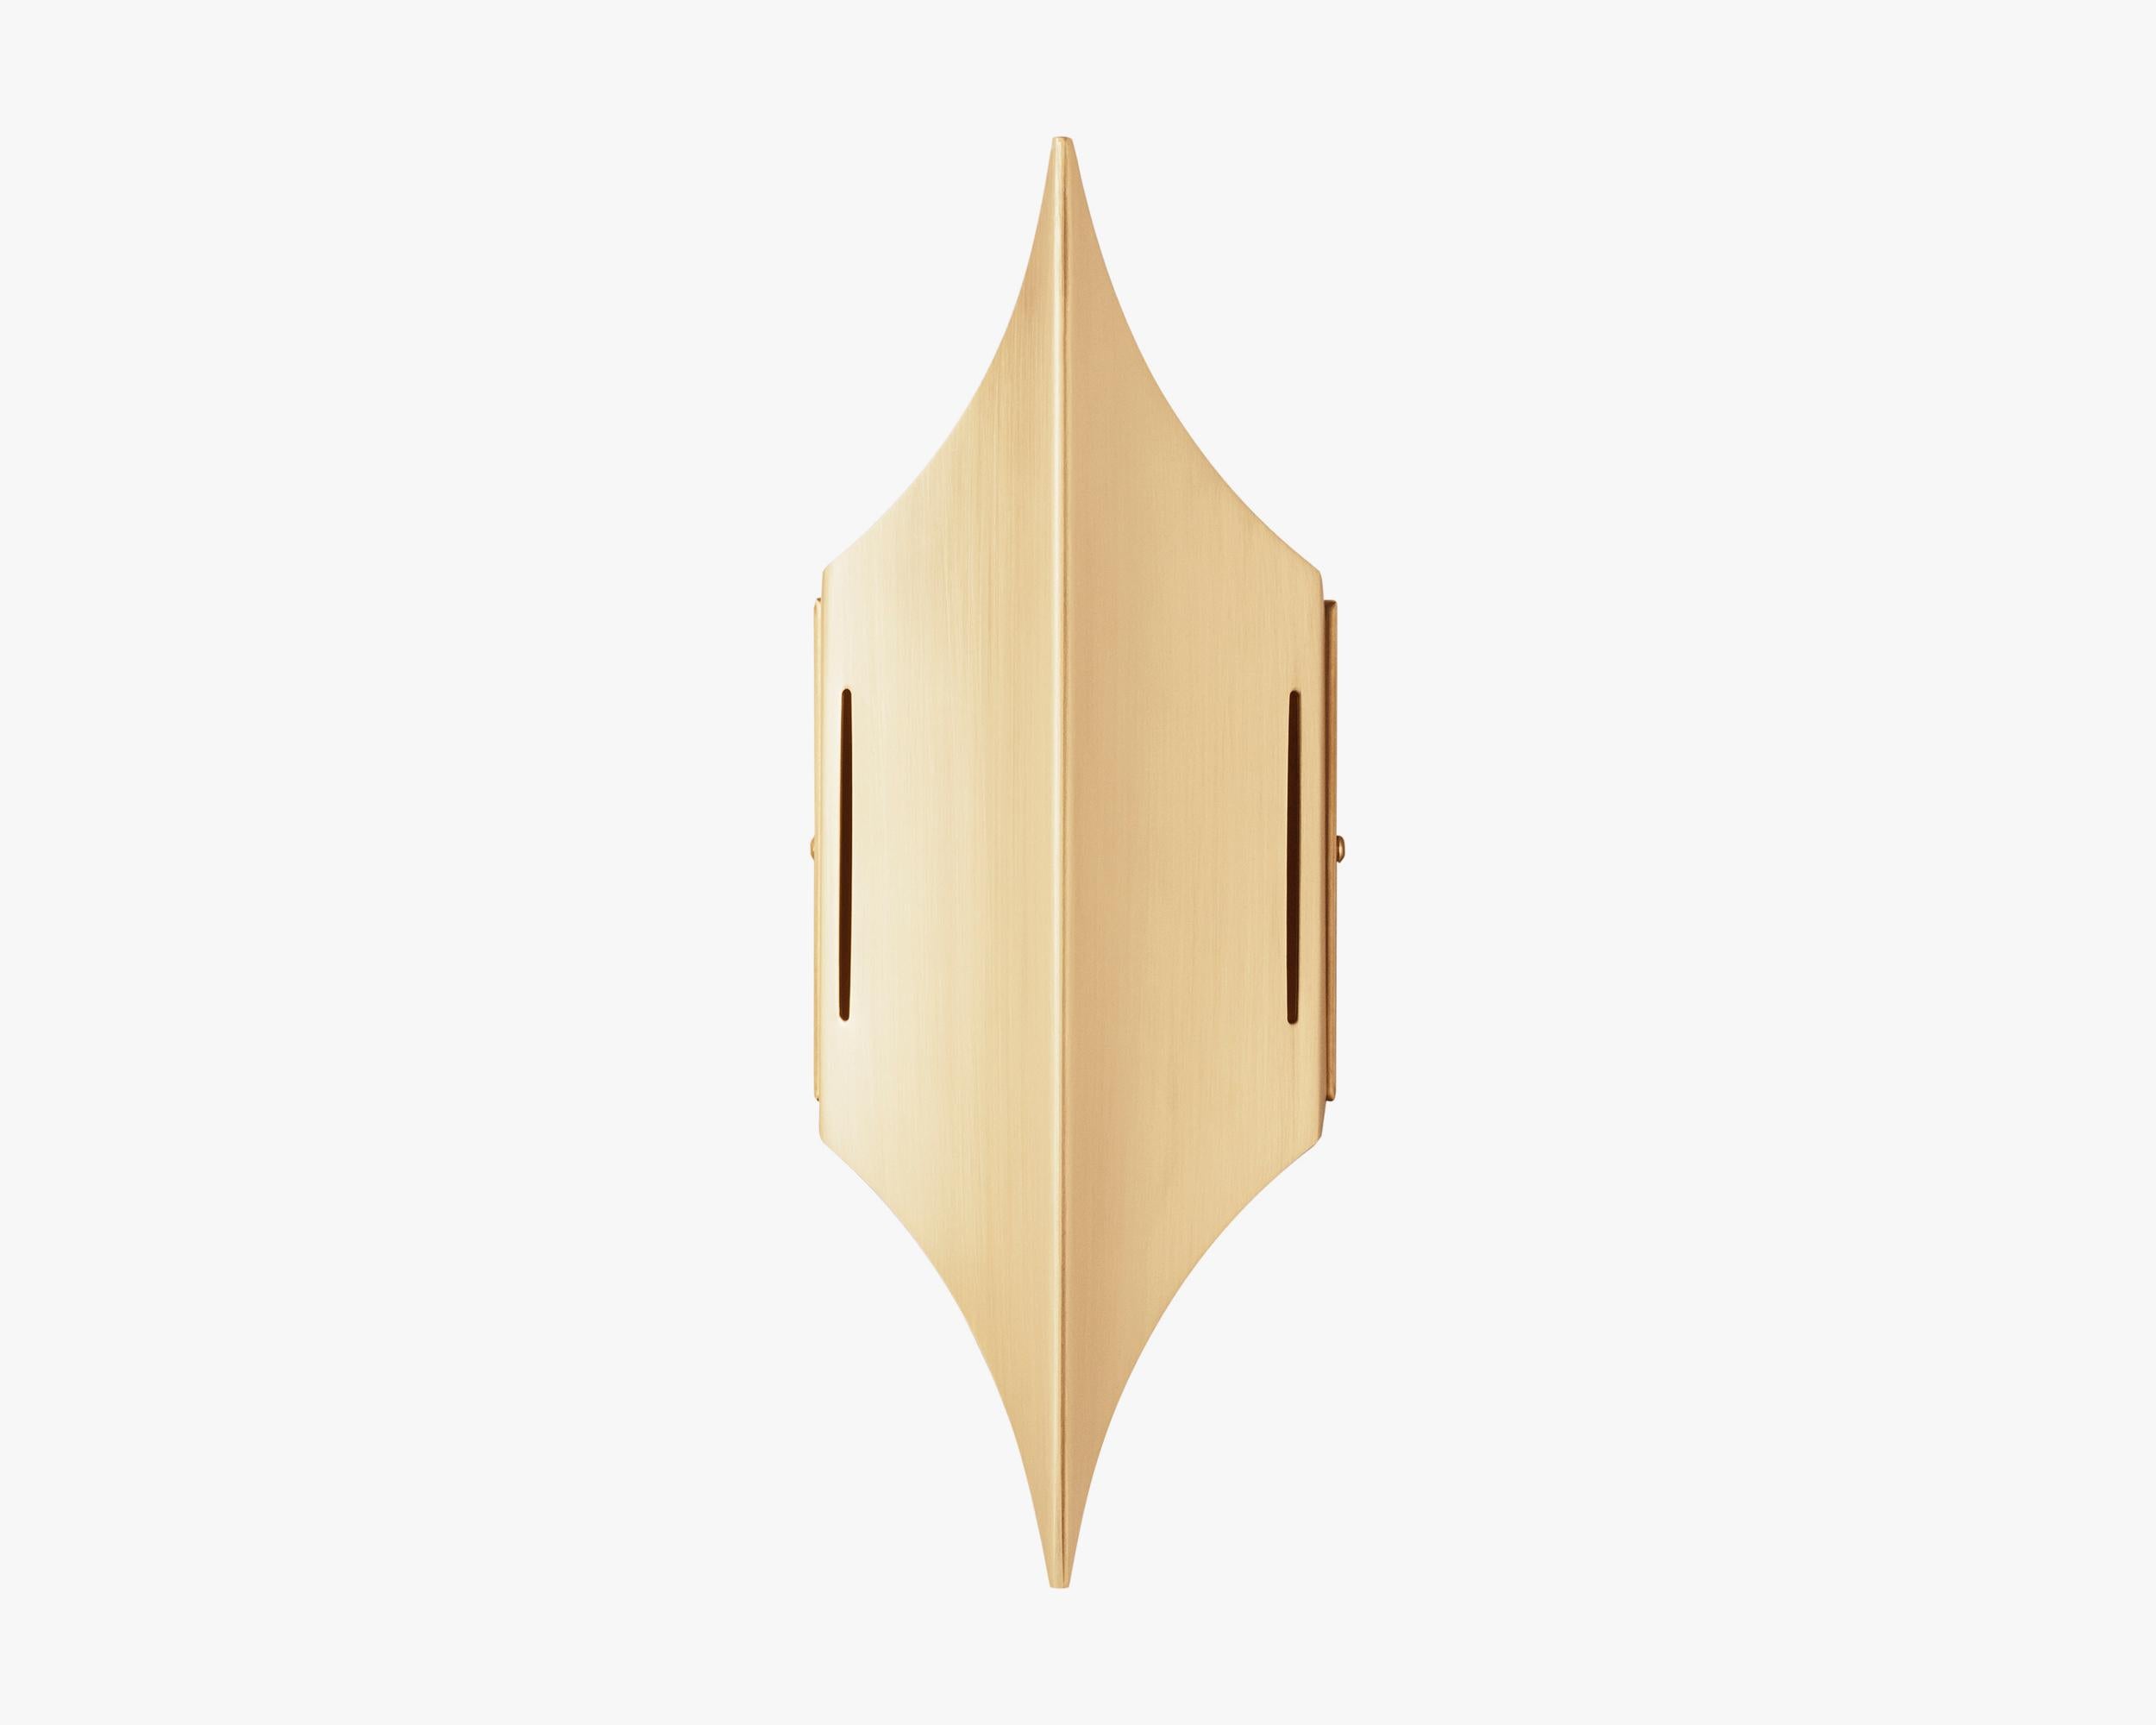 Wall lamp Gothic I by LYFA
Wall lamp Gothic I signed by Bent Karlby for LYFA

Brushed brass
L.104 mm H.280 mm
Bulbs: G9 max 28W (110V-230V)


GOTHIC I is a distinctive wall lamp full of character designed in 1970 by Bent Karlby. The premium